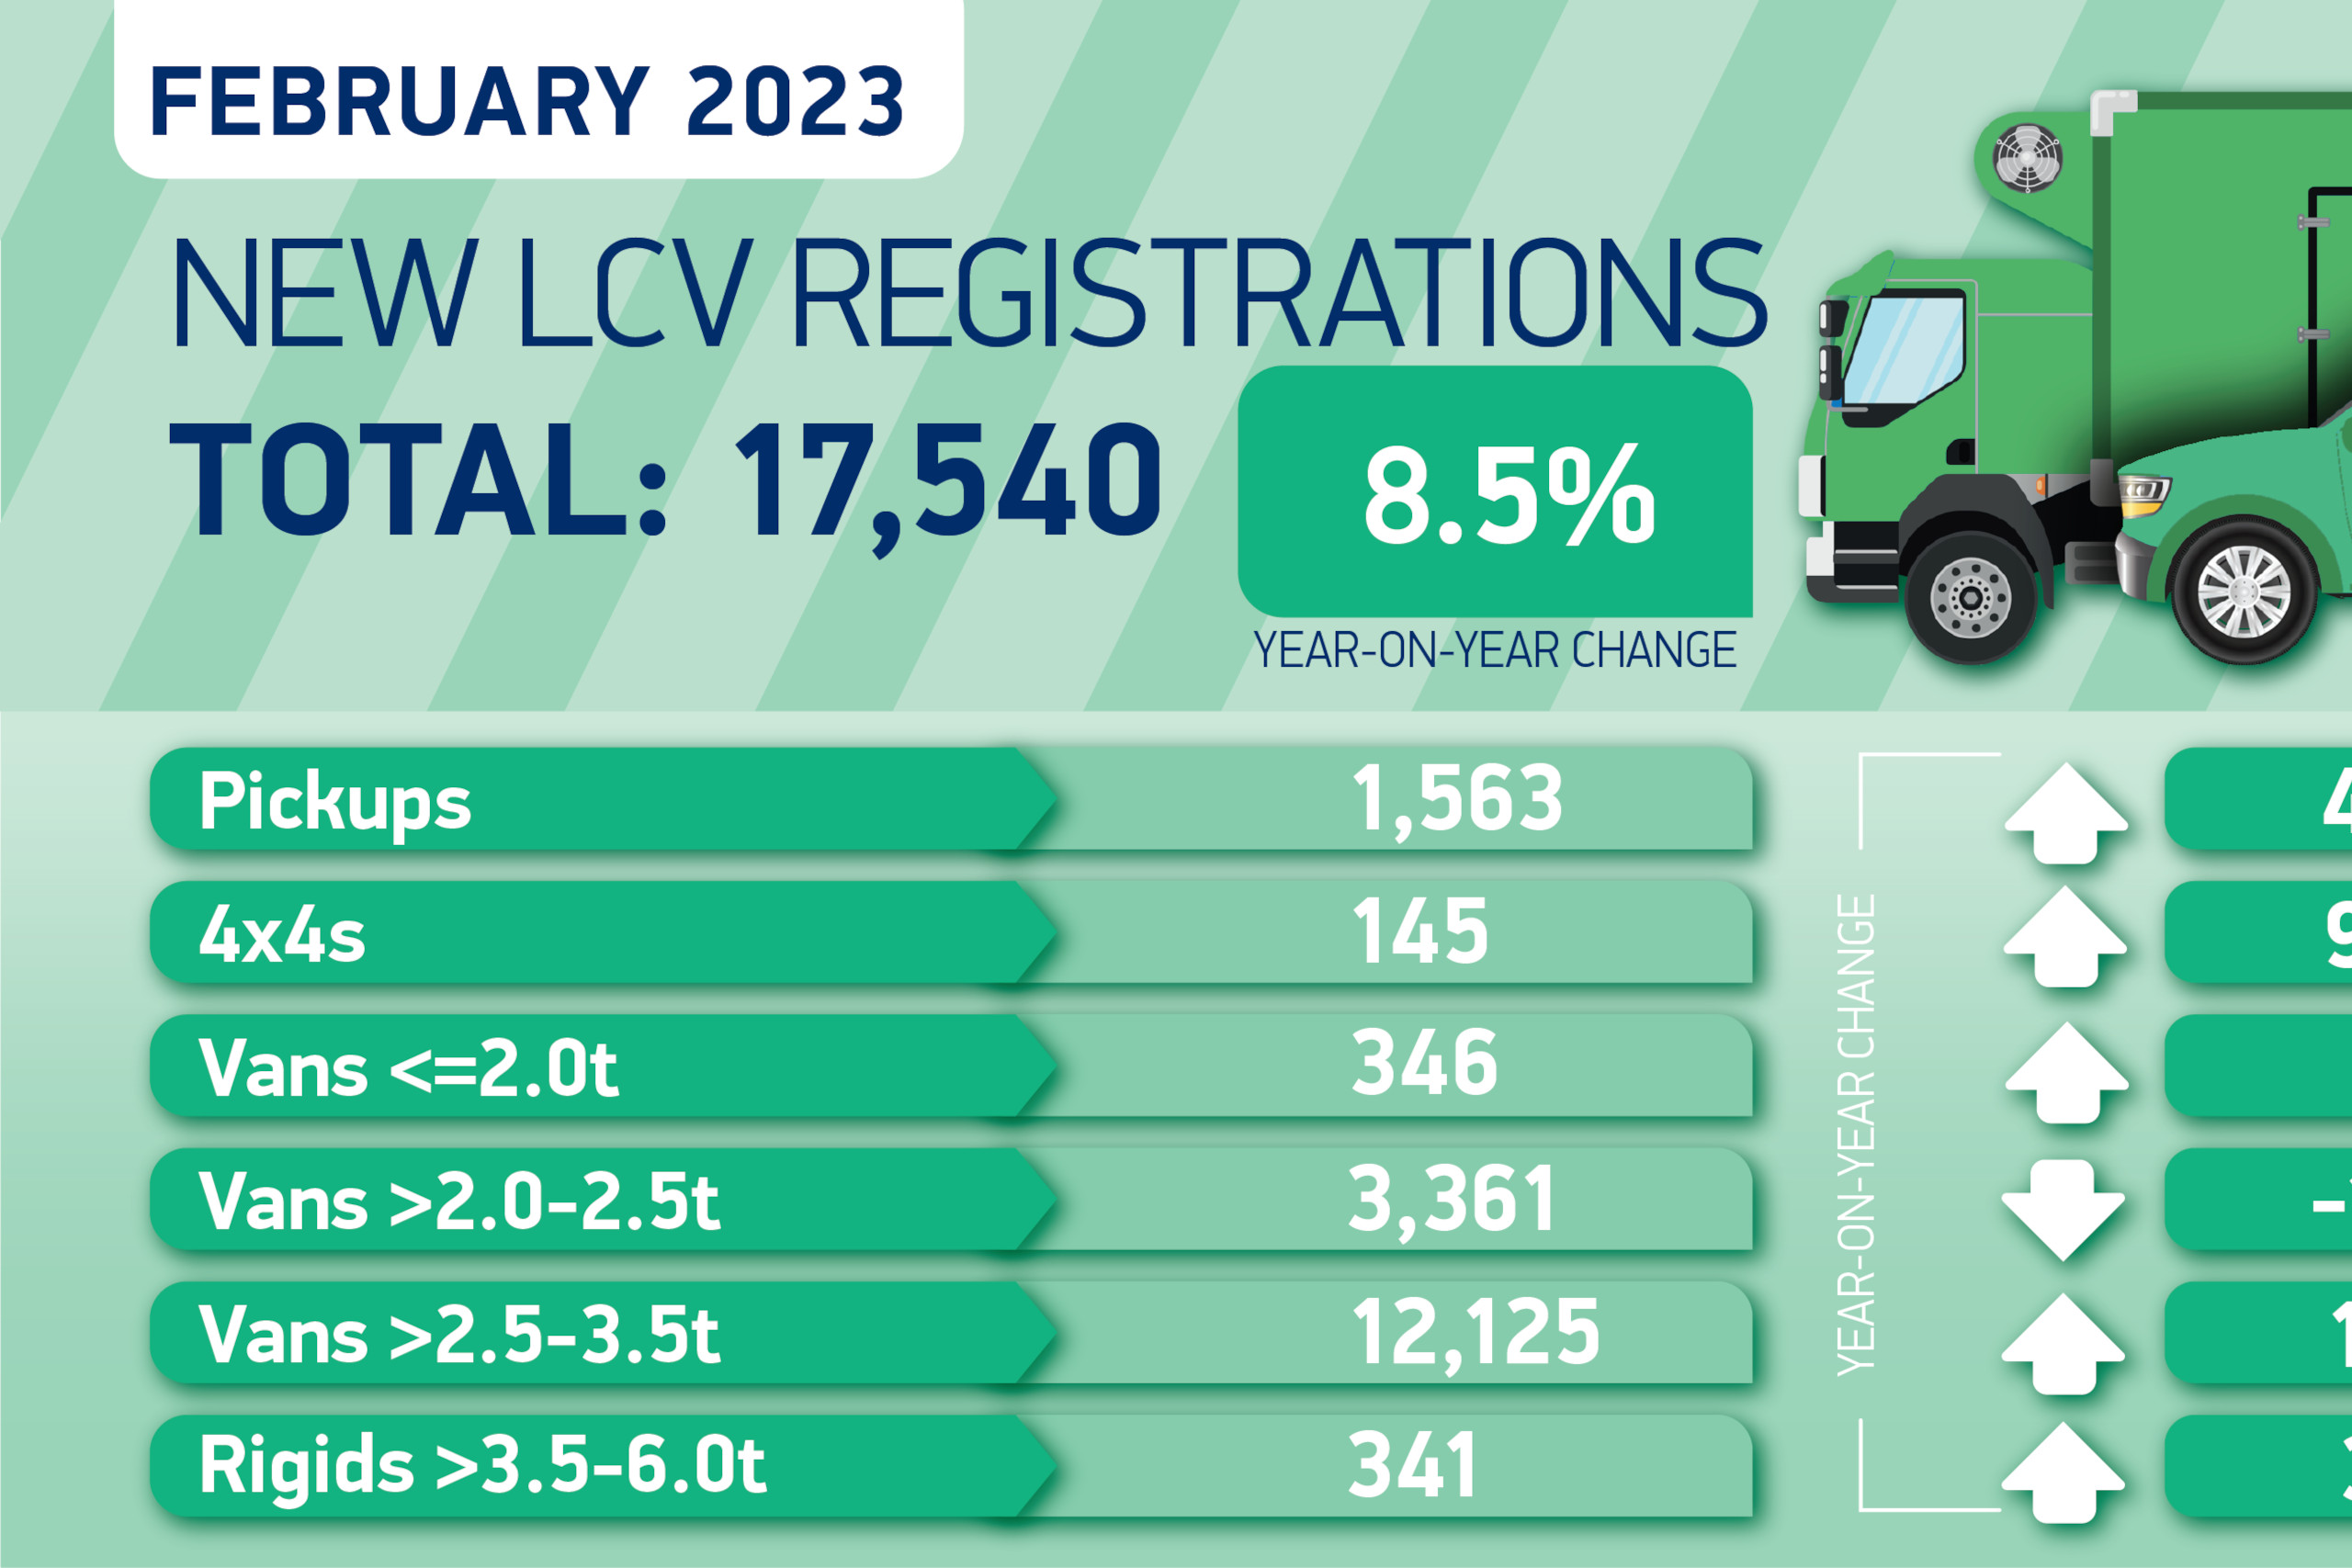 UK Van Registrations Exceed Expectations in February